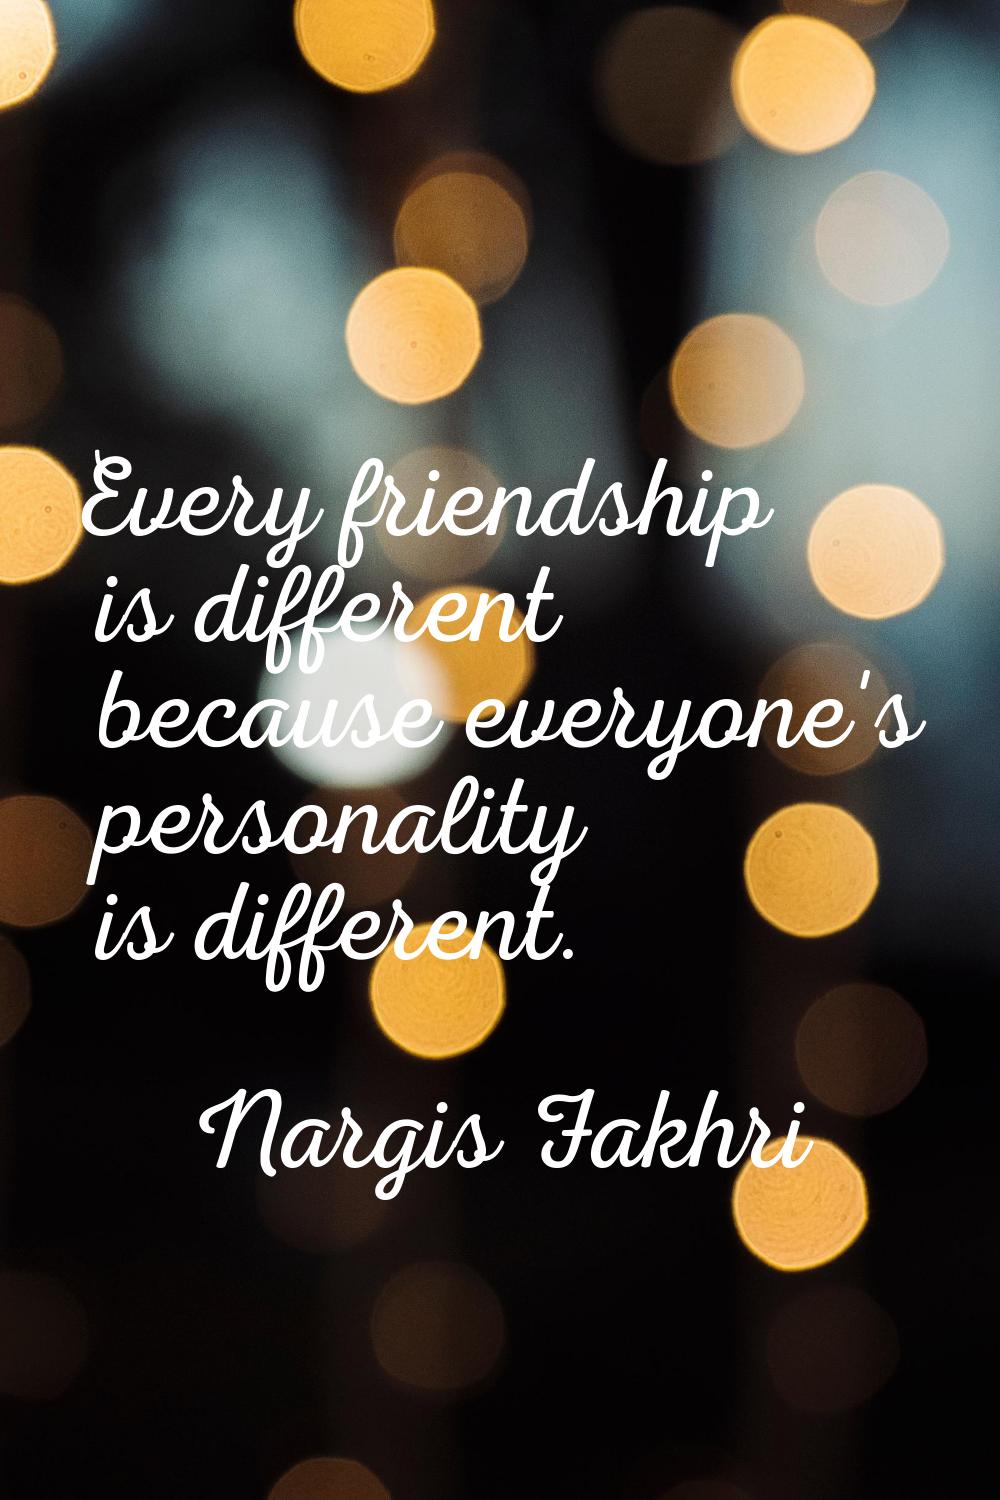 Every friendship is different because everyone's personality is different.